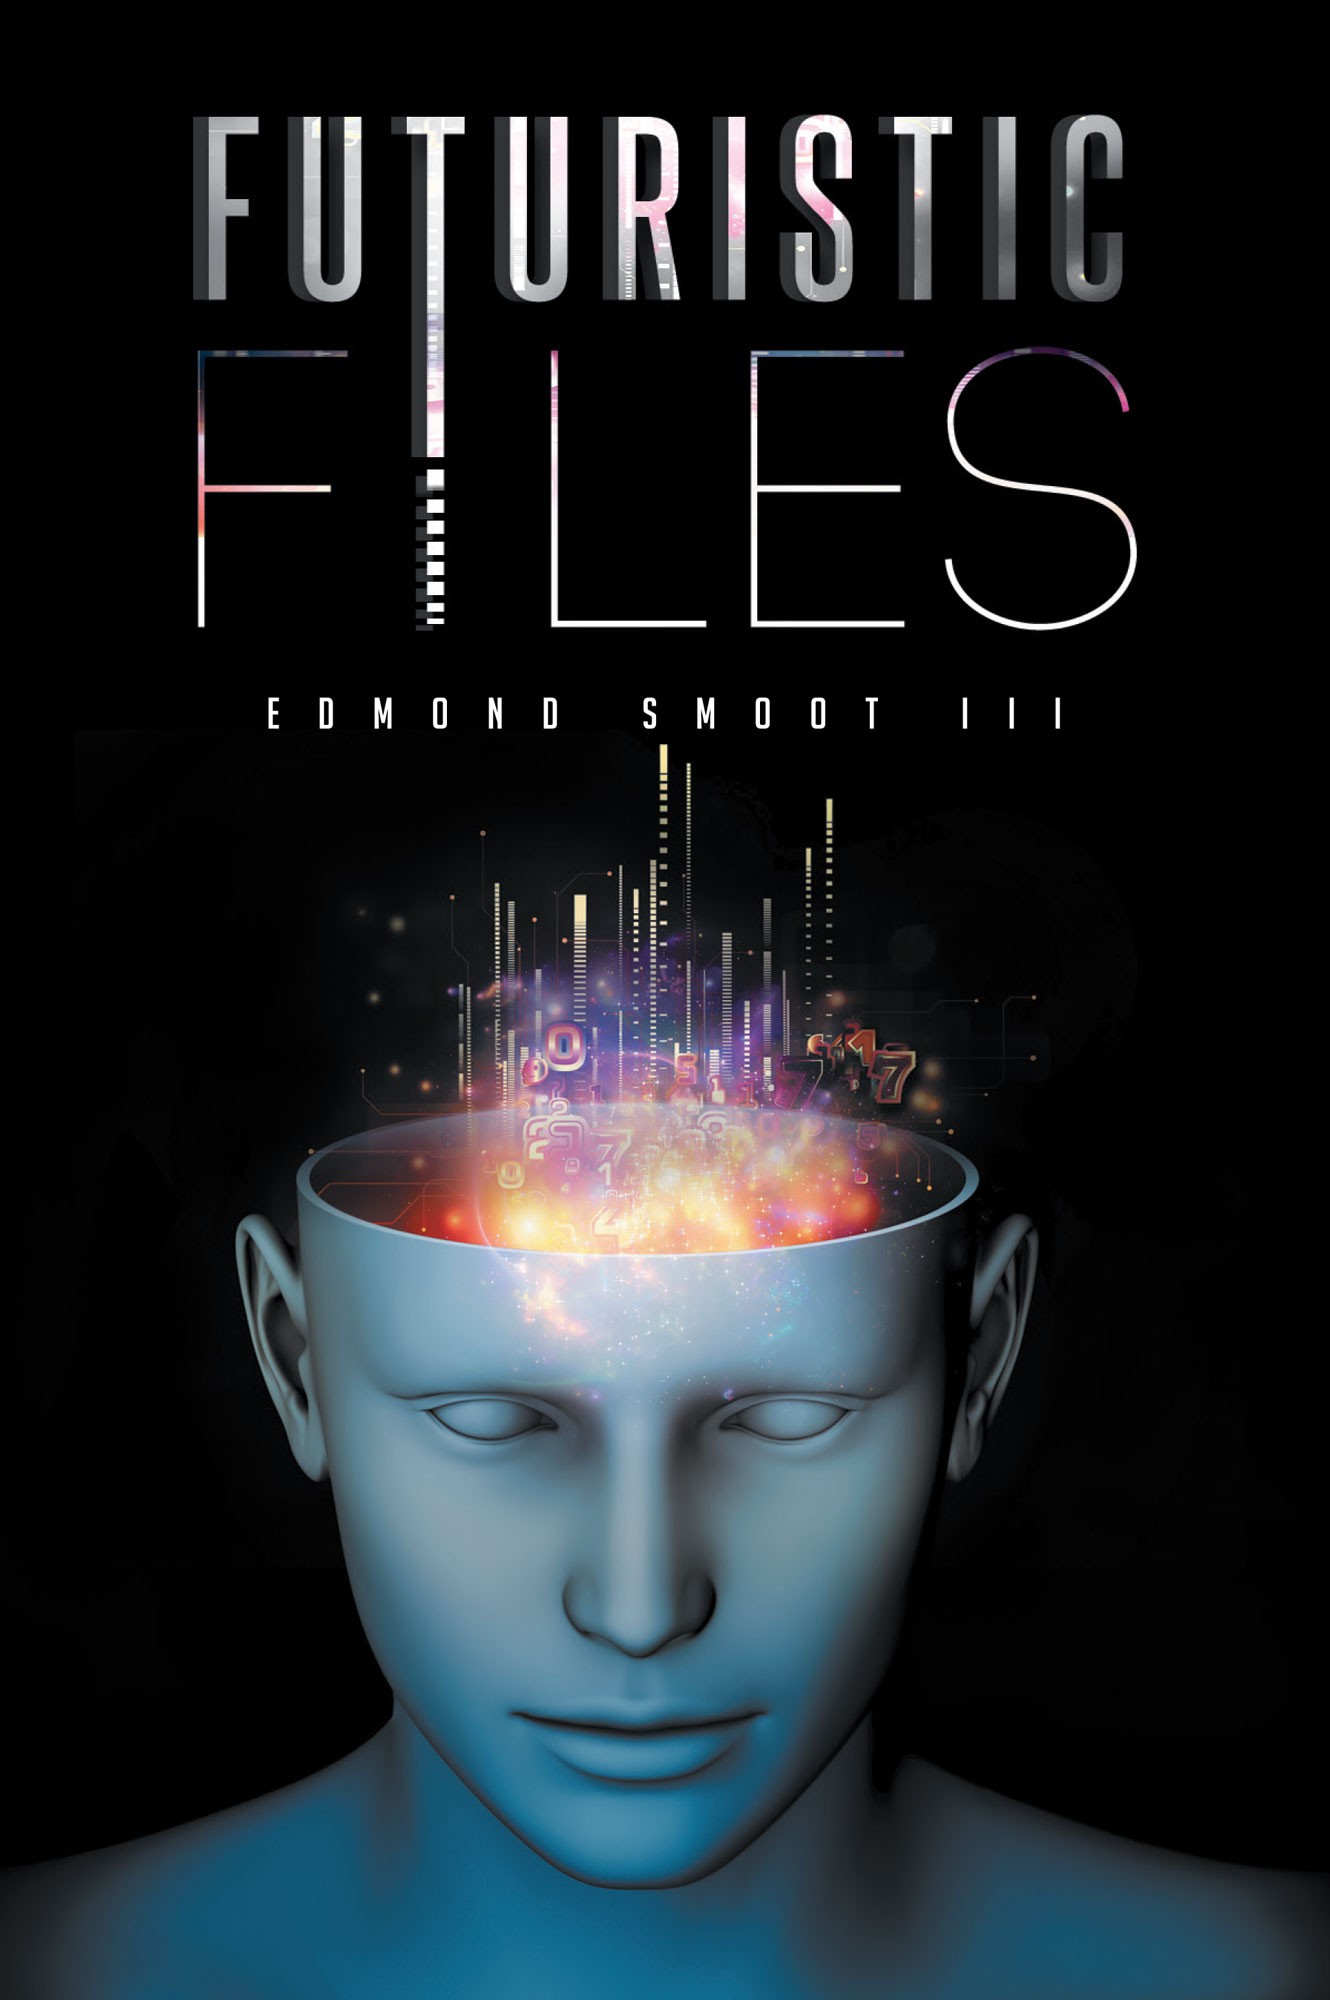 EDMOND SMOOT III's New Book “Futuristic Files” is an Informative and